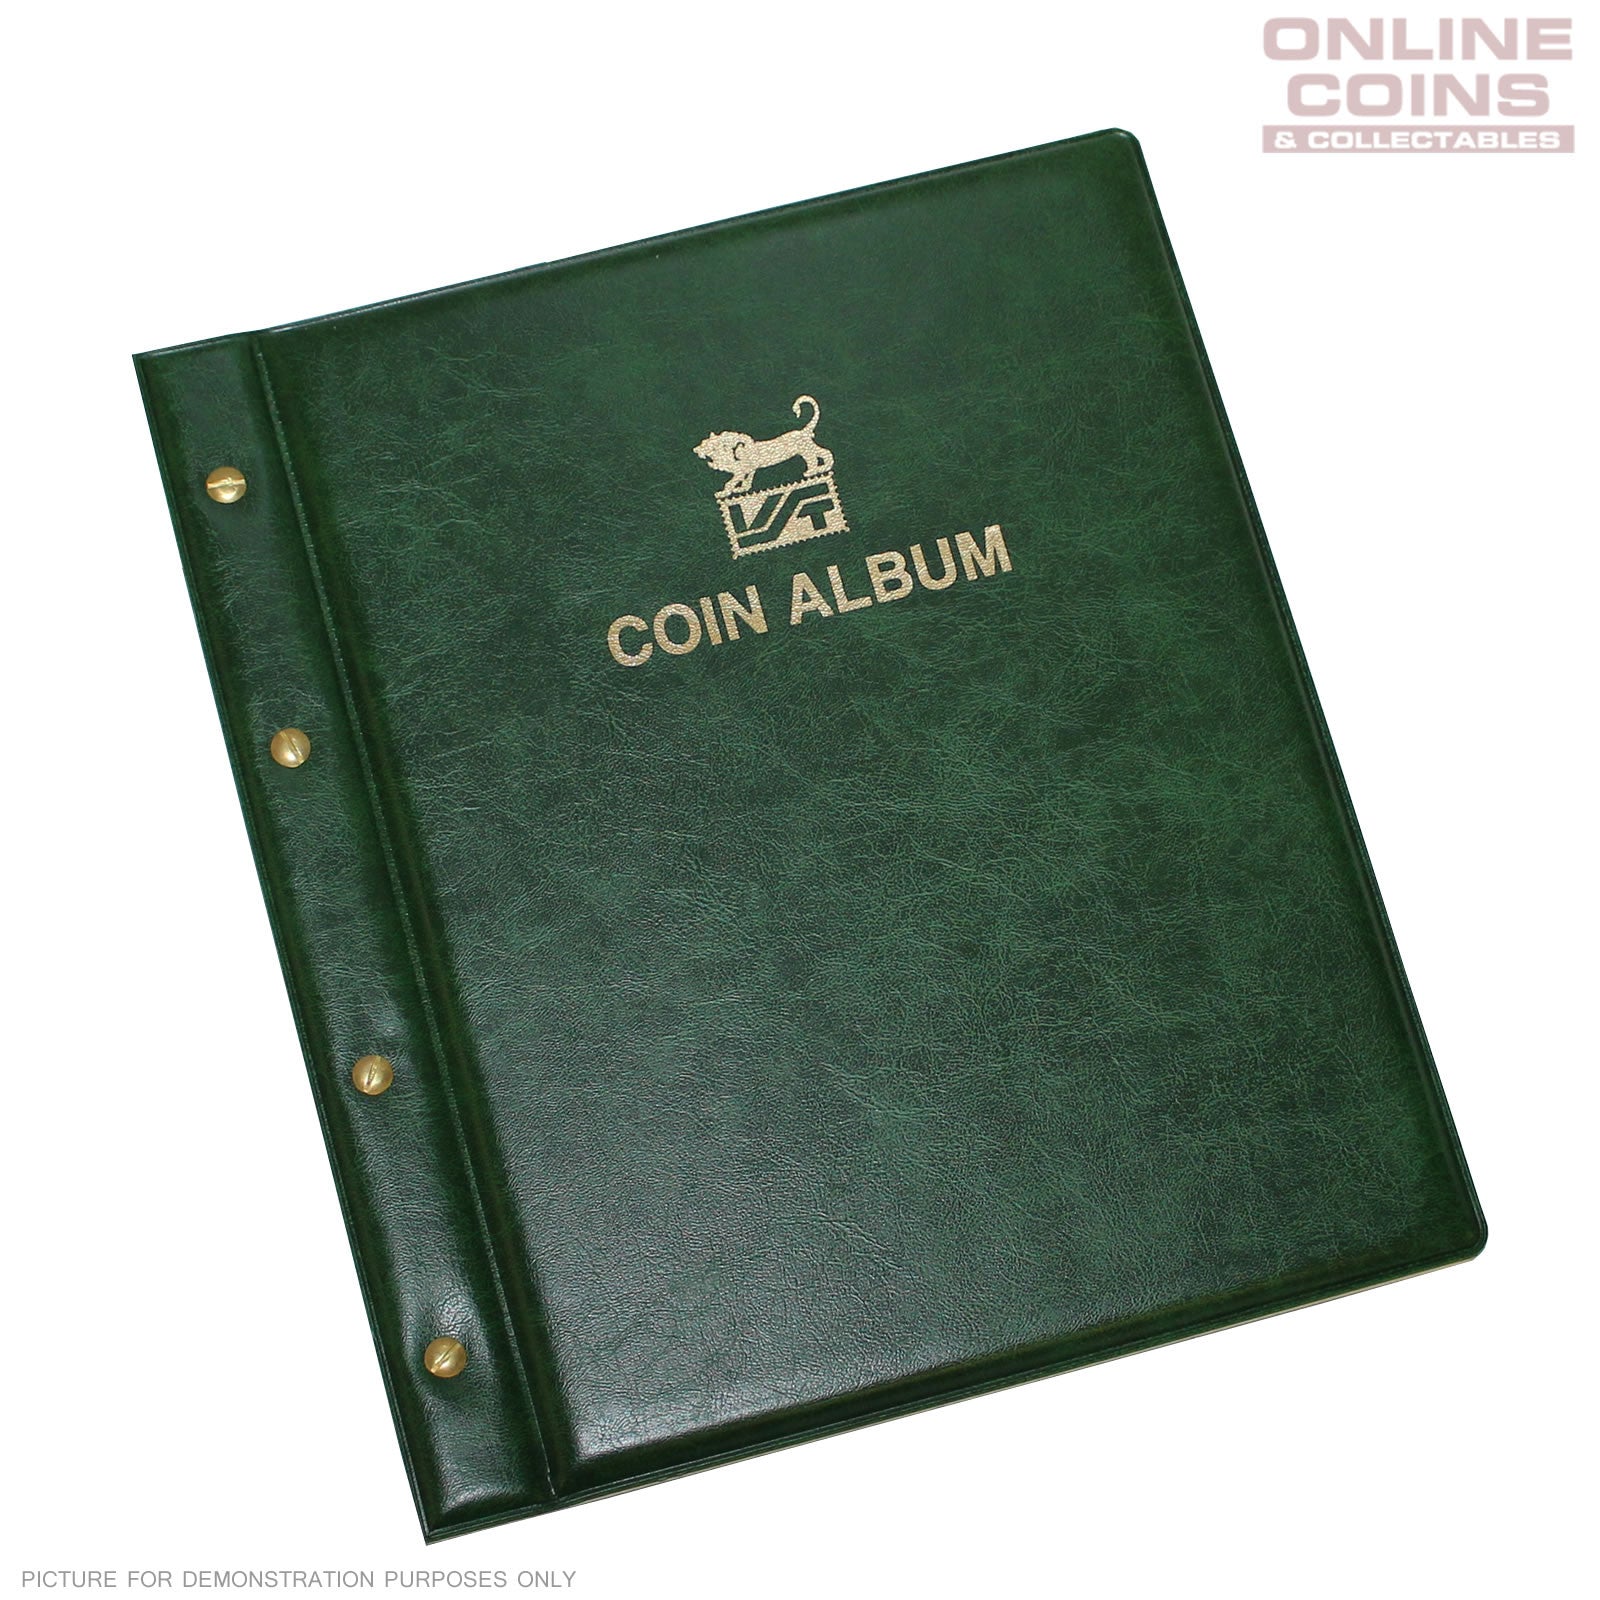 VST Coin Album Padded leatherette Cover Including 6 Coin Album Pages - Green